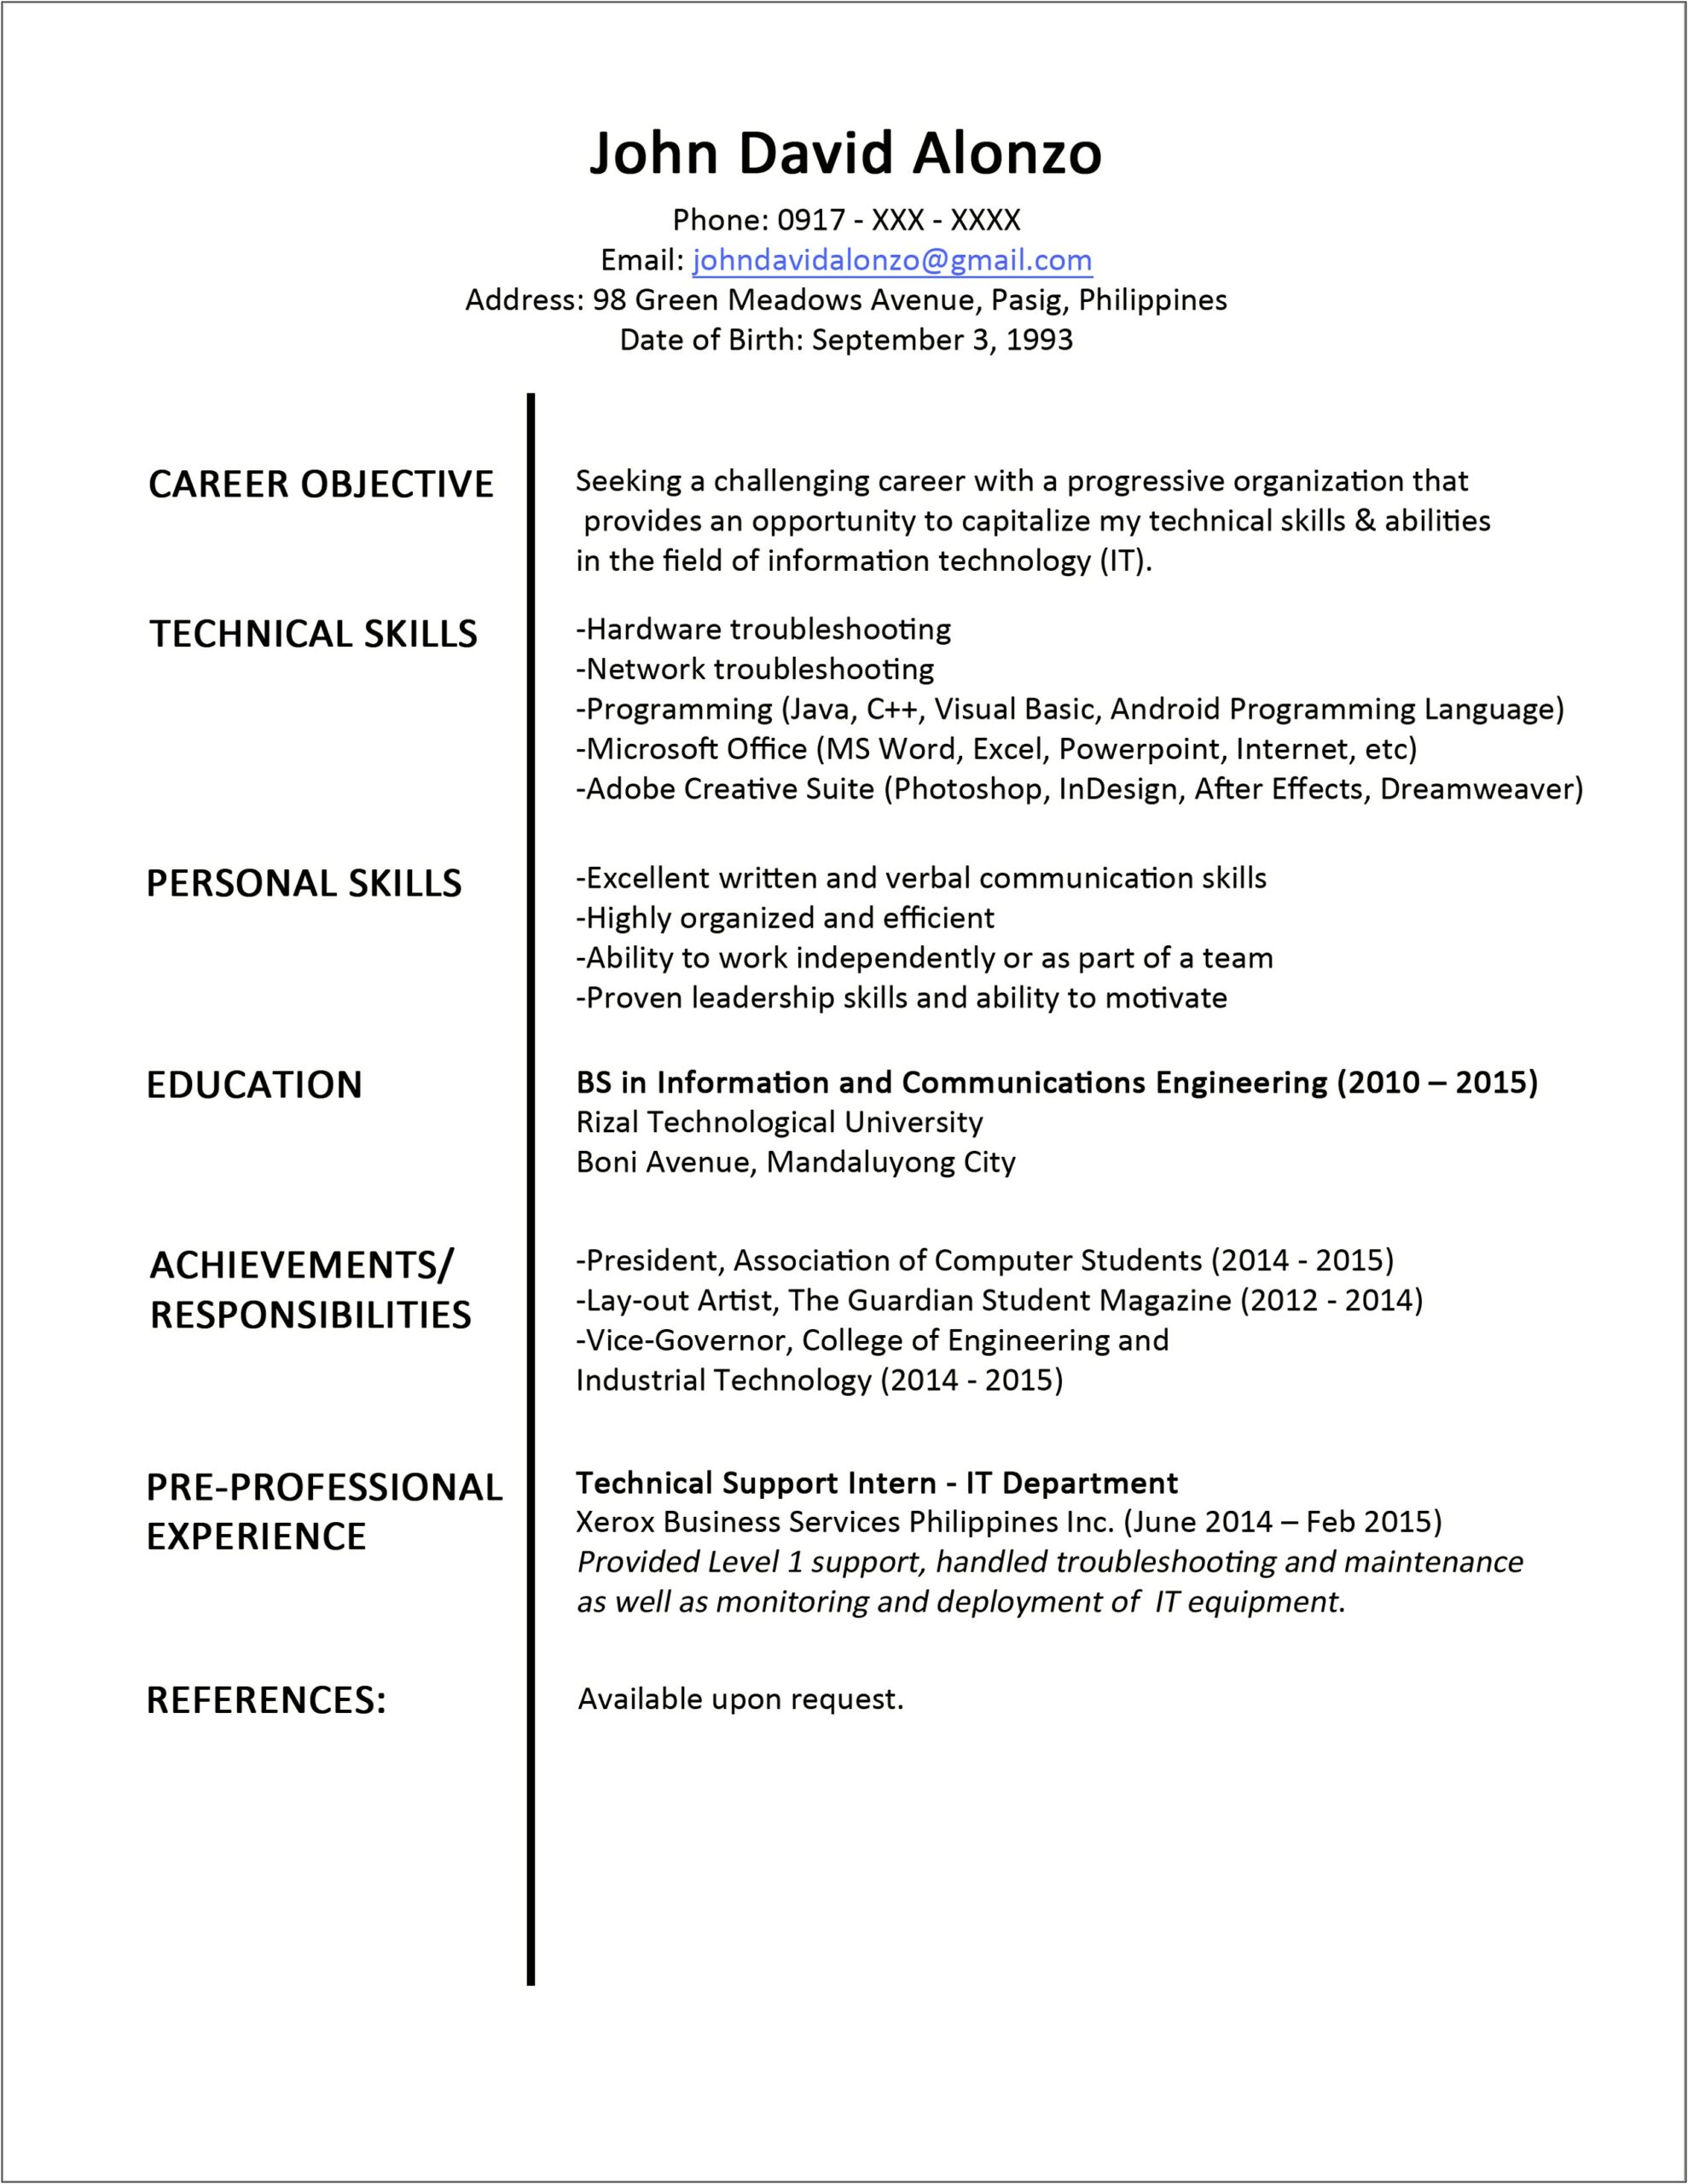 Is Comprehensive Work History Your Resume